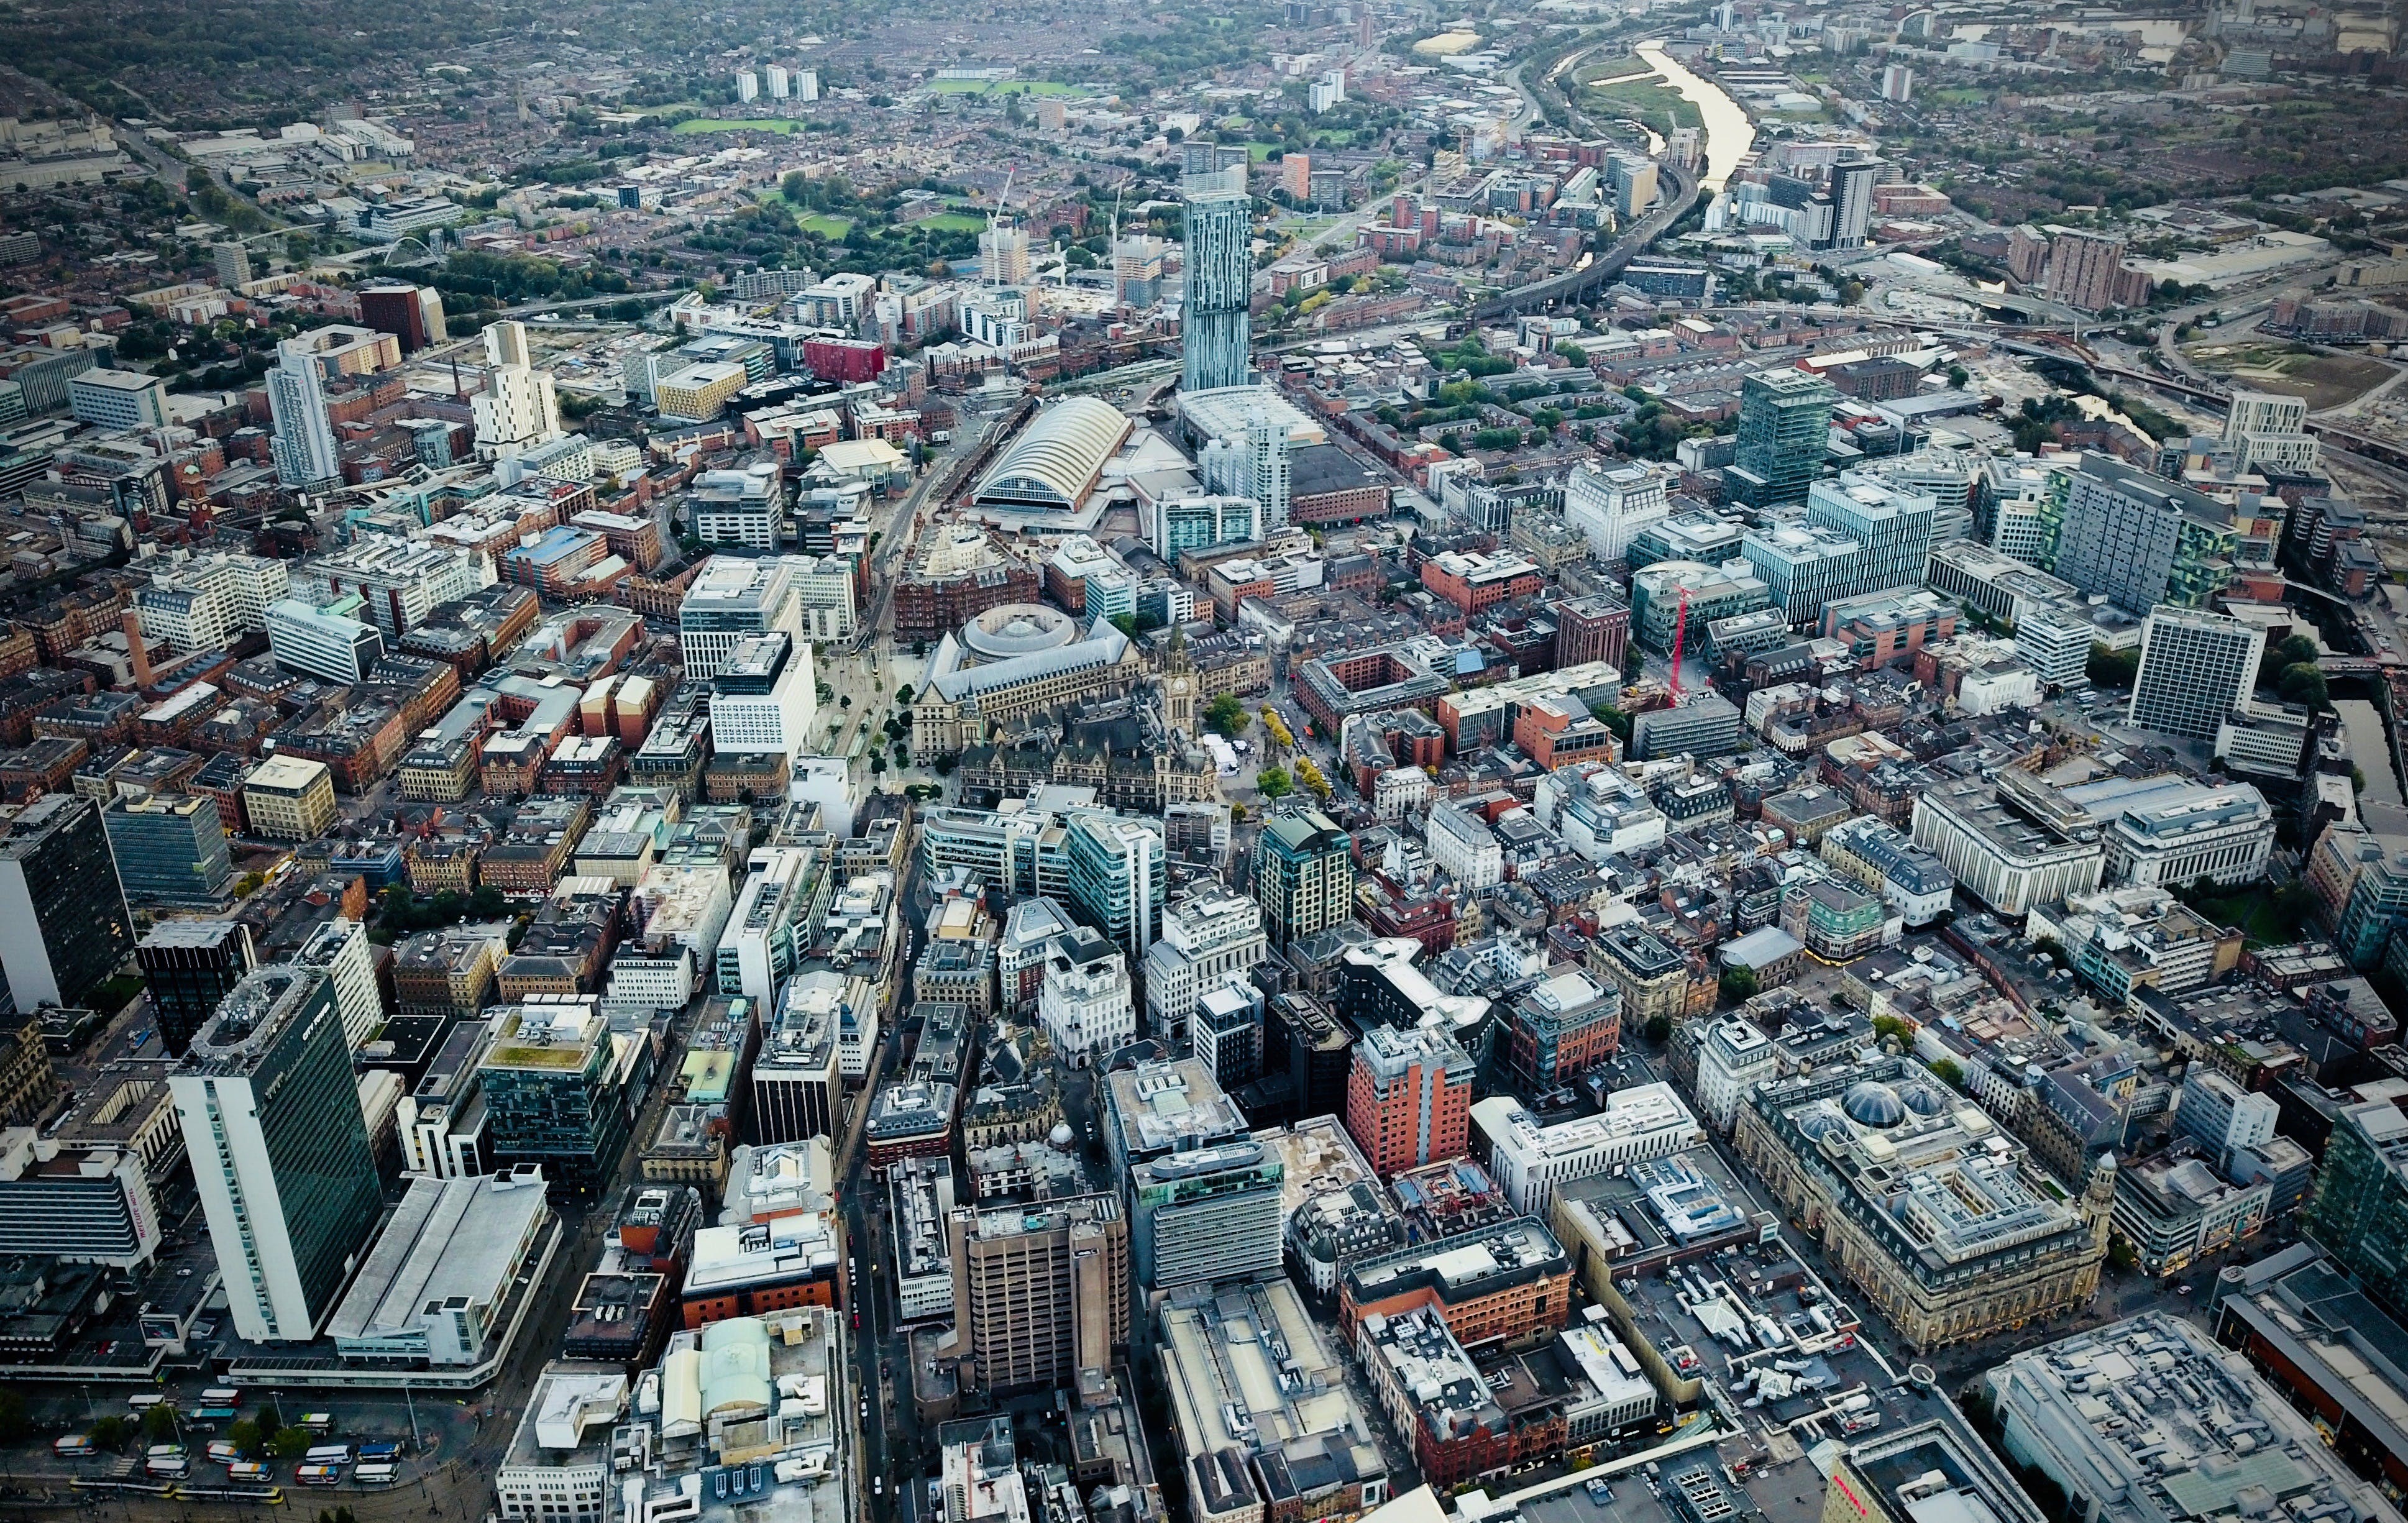 An aerial view of Manchester city centre, showing the buildings from above